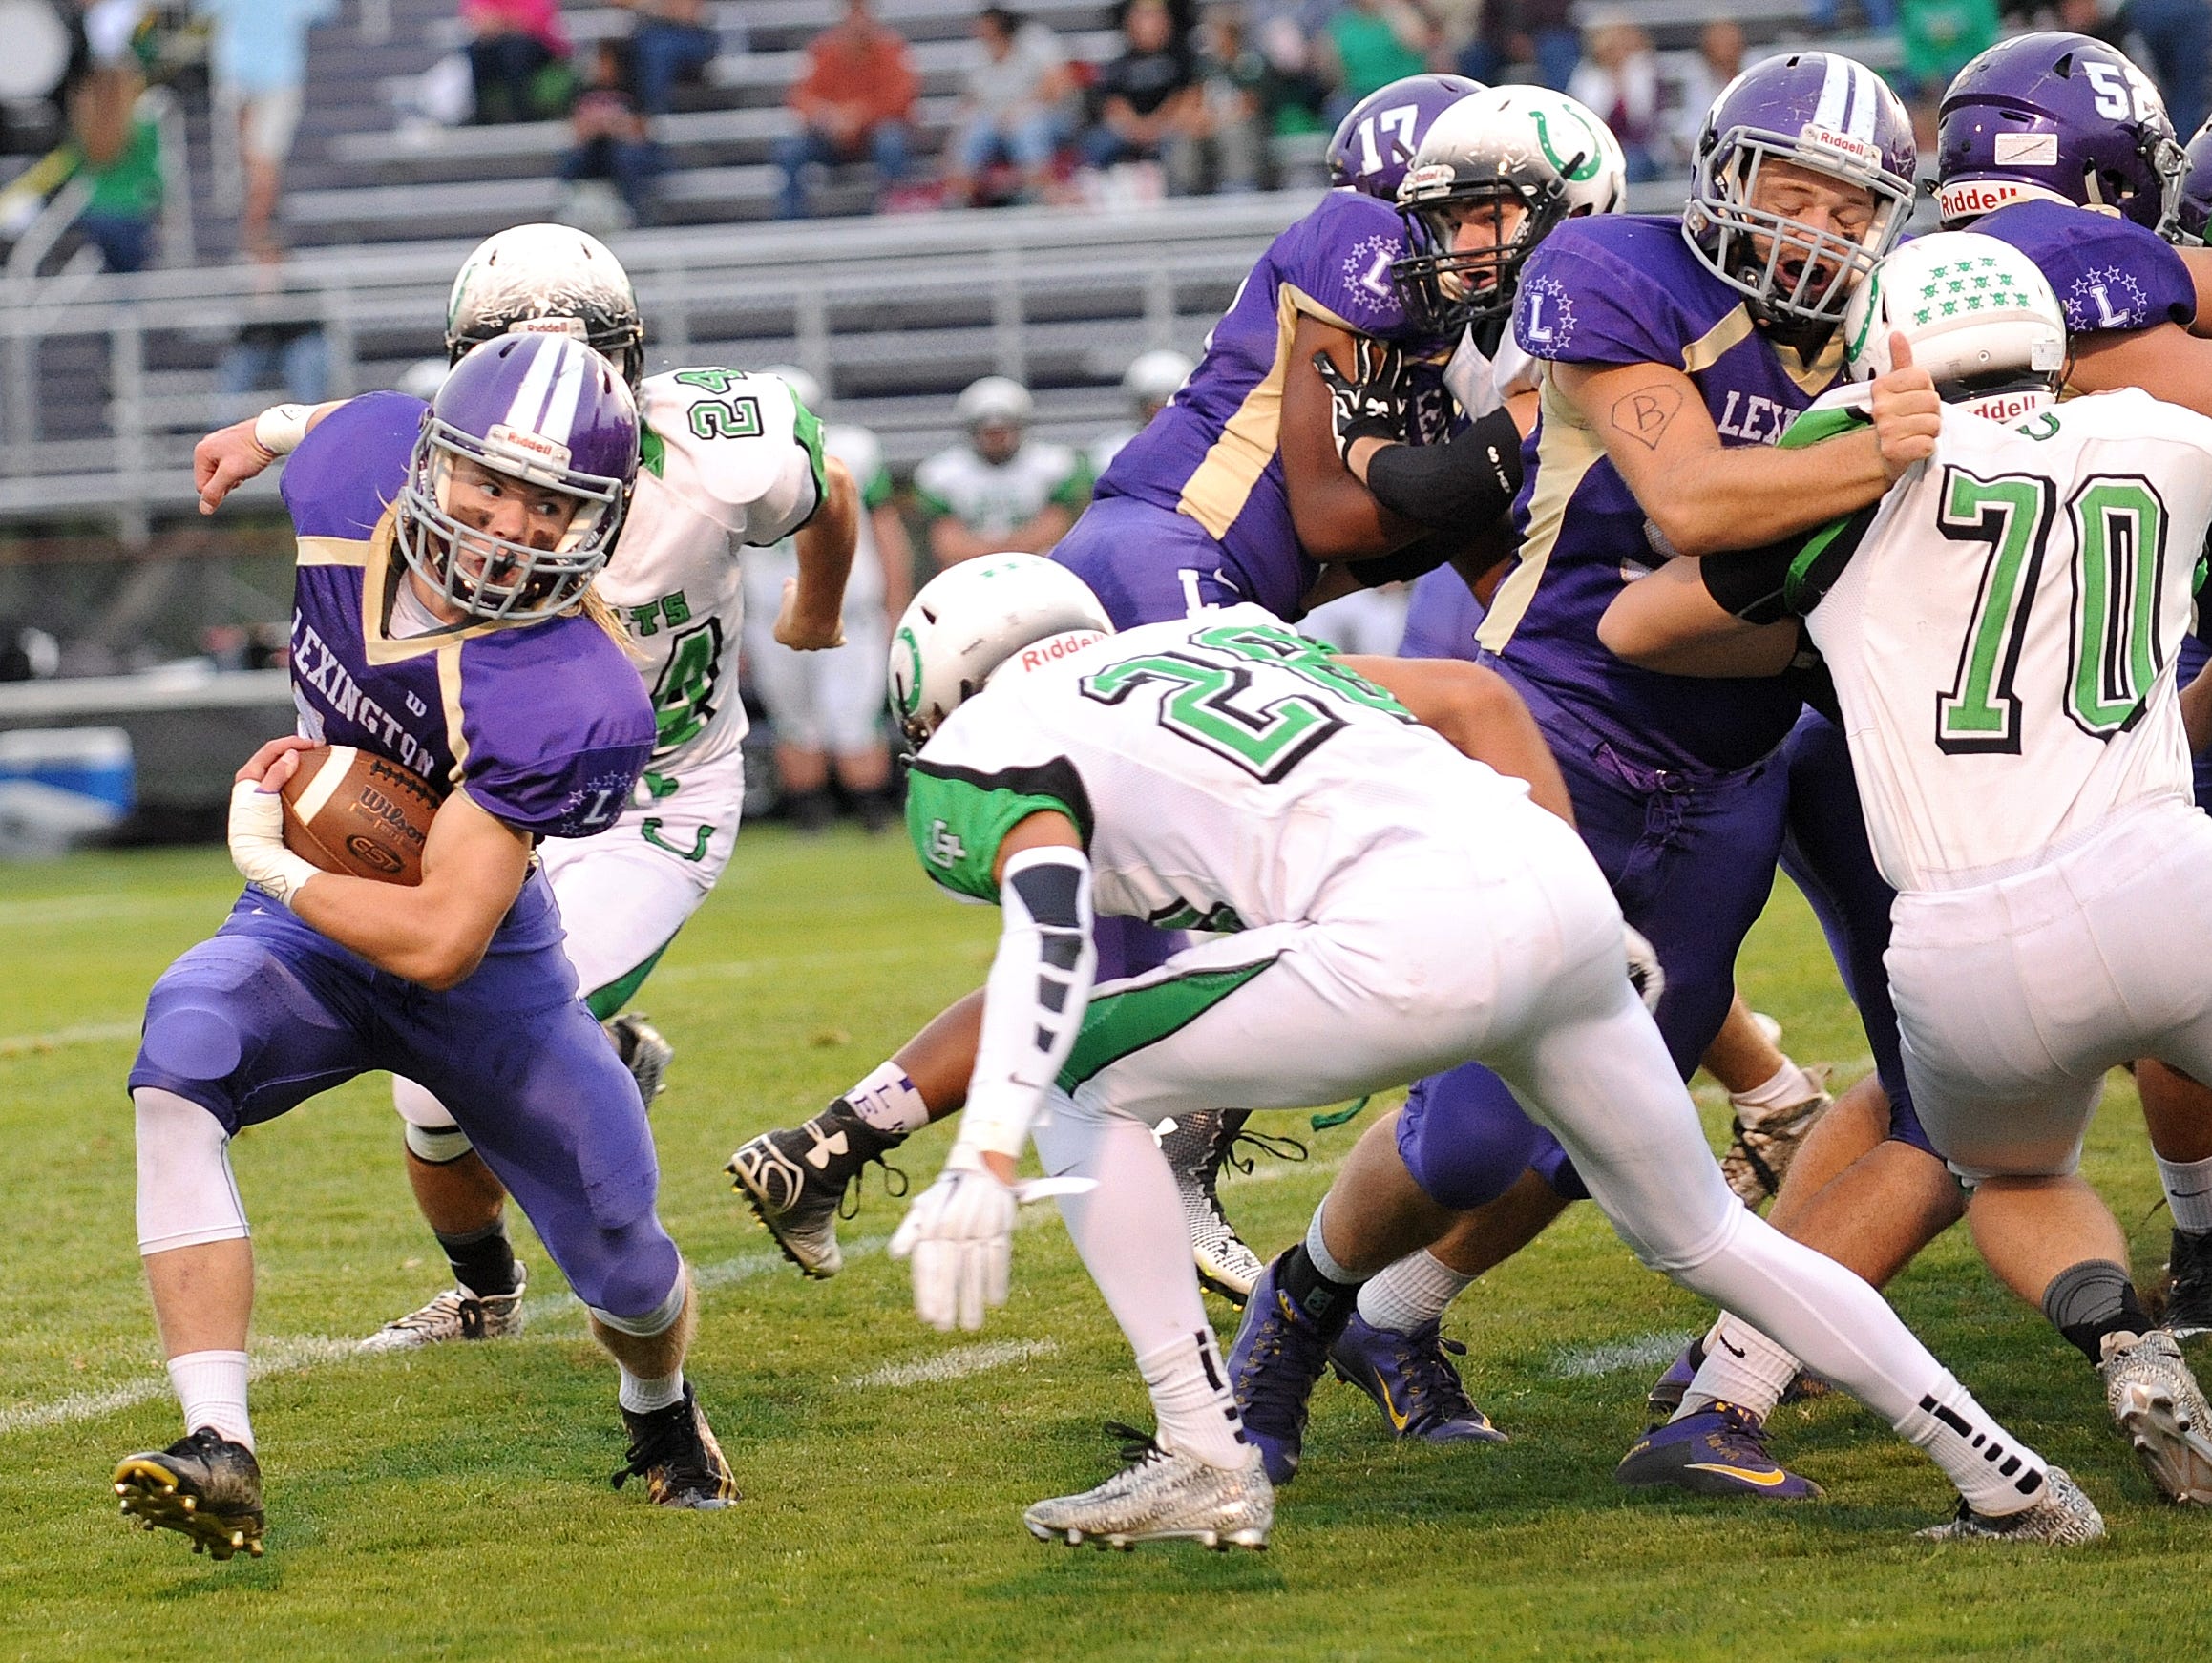 Lexington's Jakob Goettel runs the ball Friday night during their game against Clear Fork.